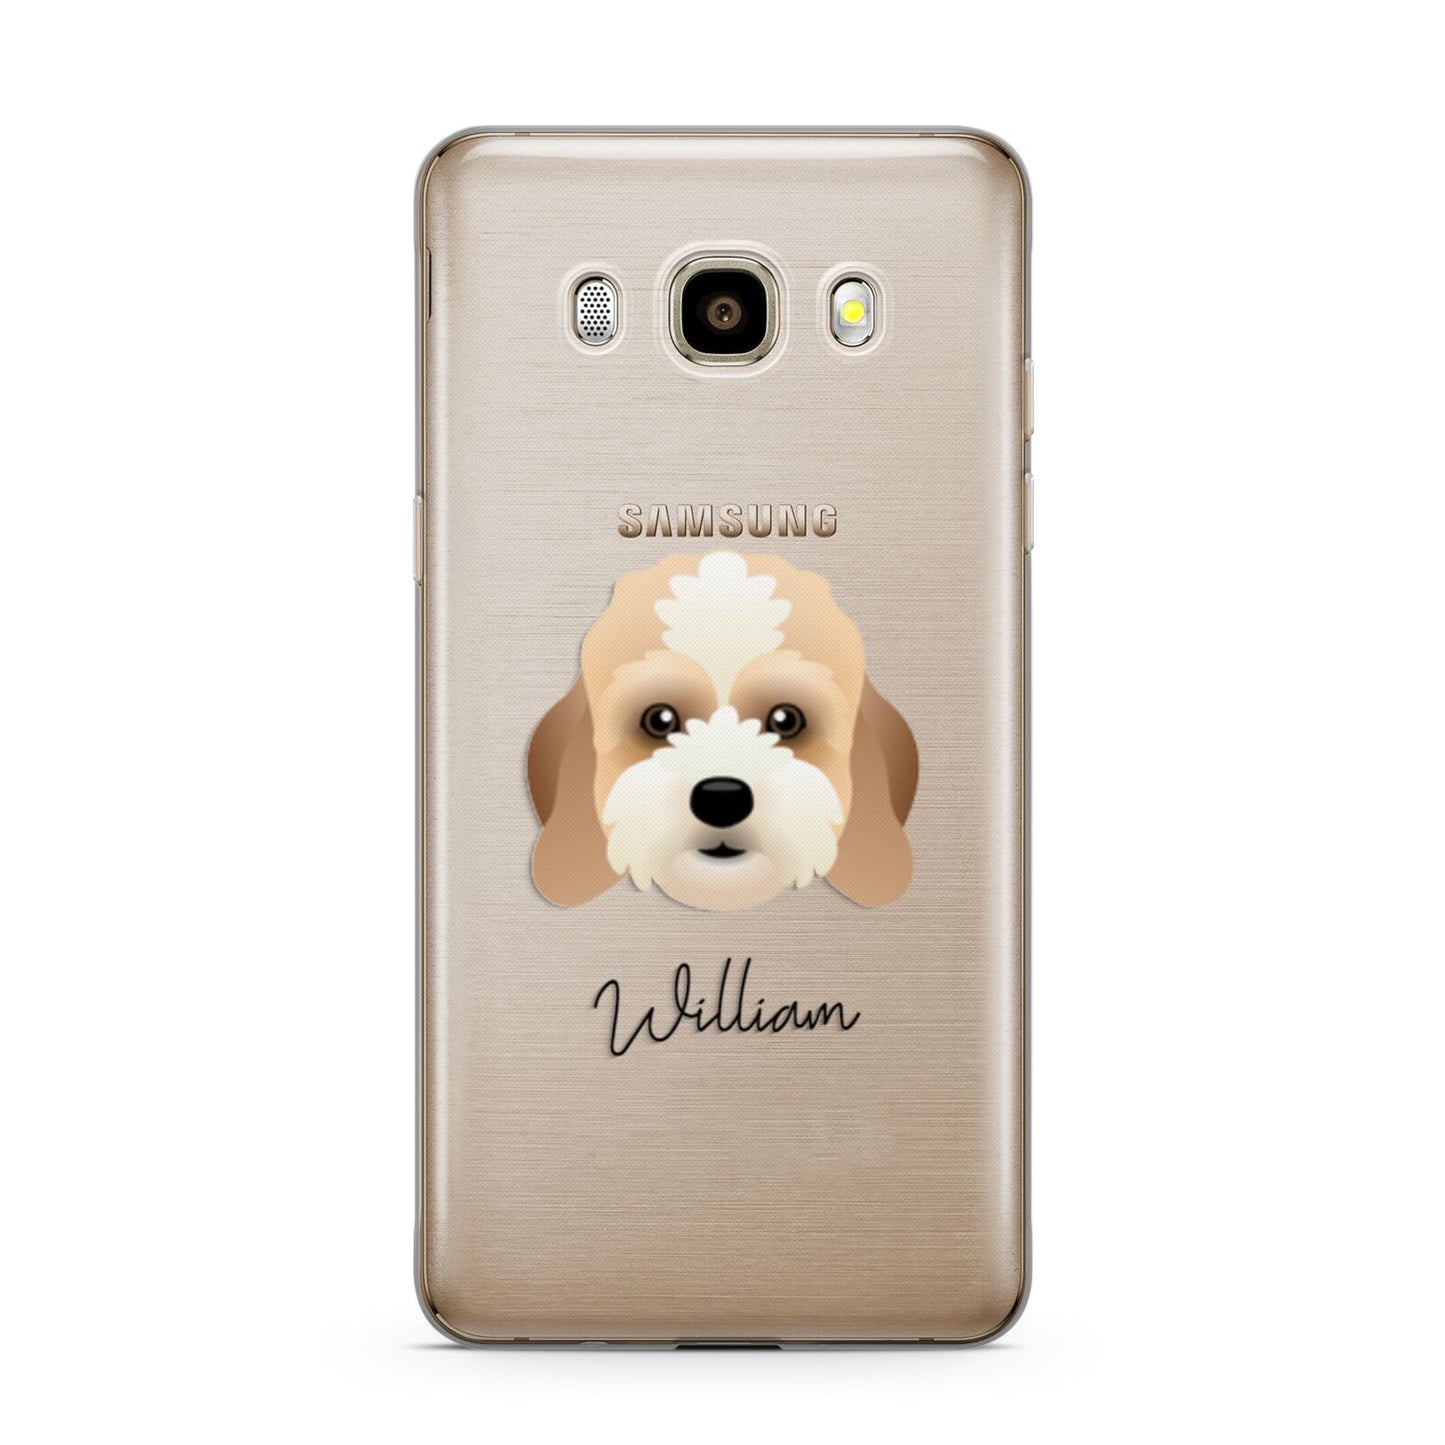 Lhasapoo Personalised Samsung Galaxy J7 2016 Case on gold phone